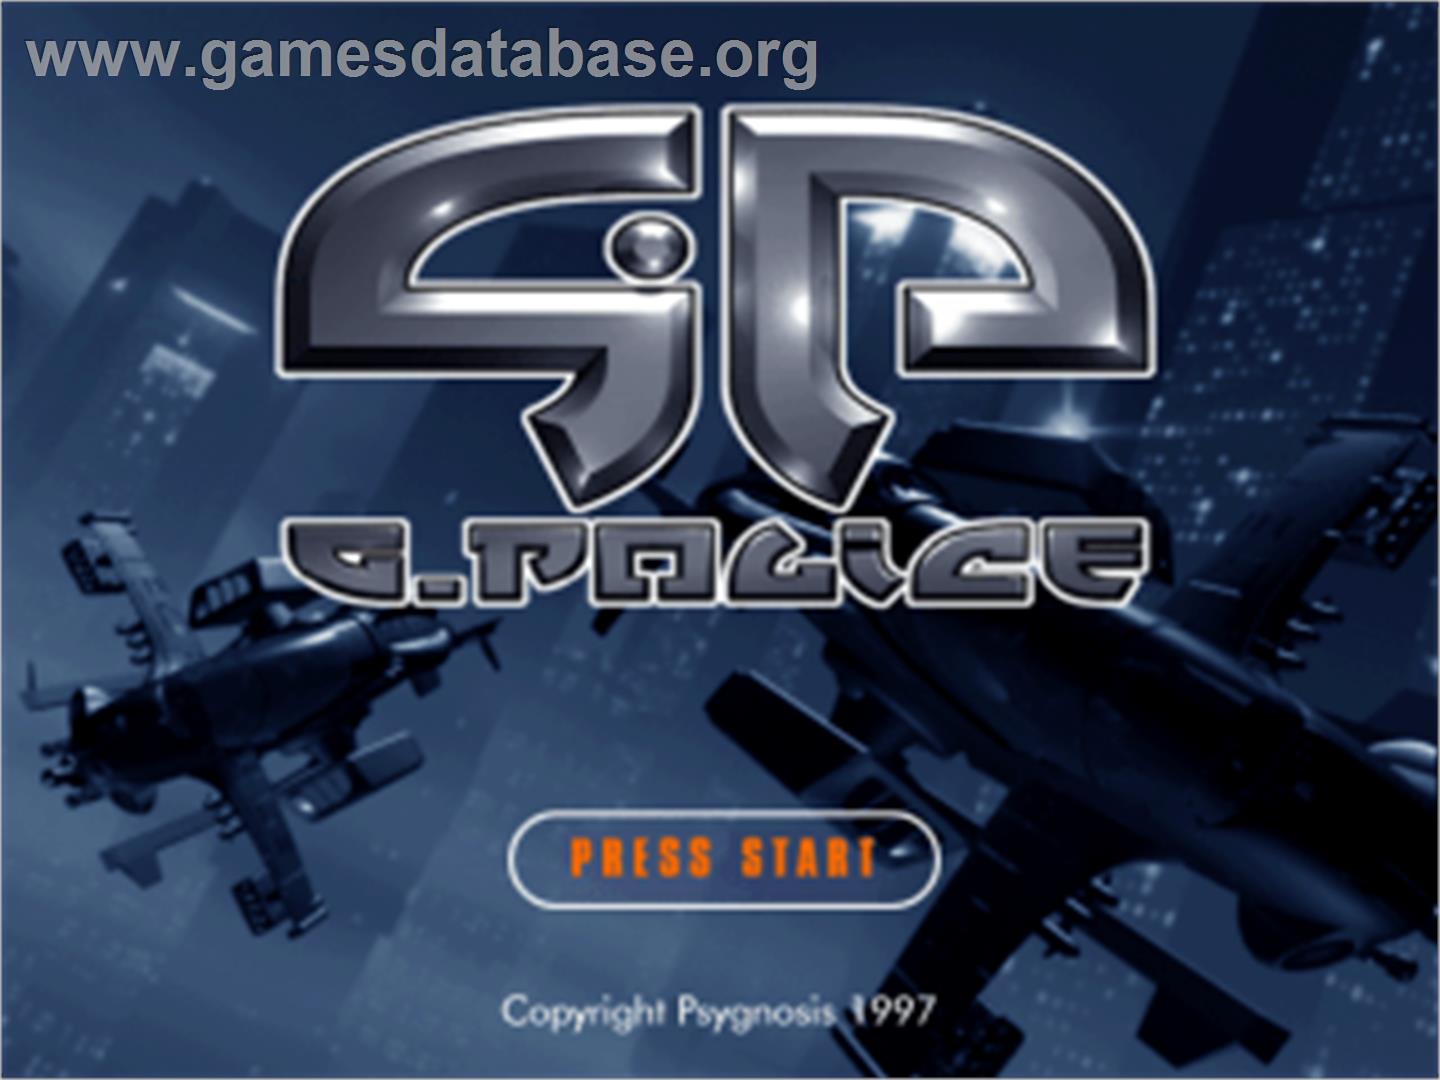 G-Police: Weapons of Justice - Sony Playstation - Artwork - Title Screen